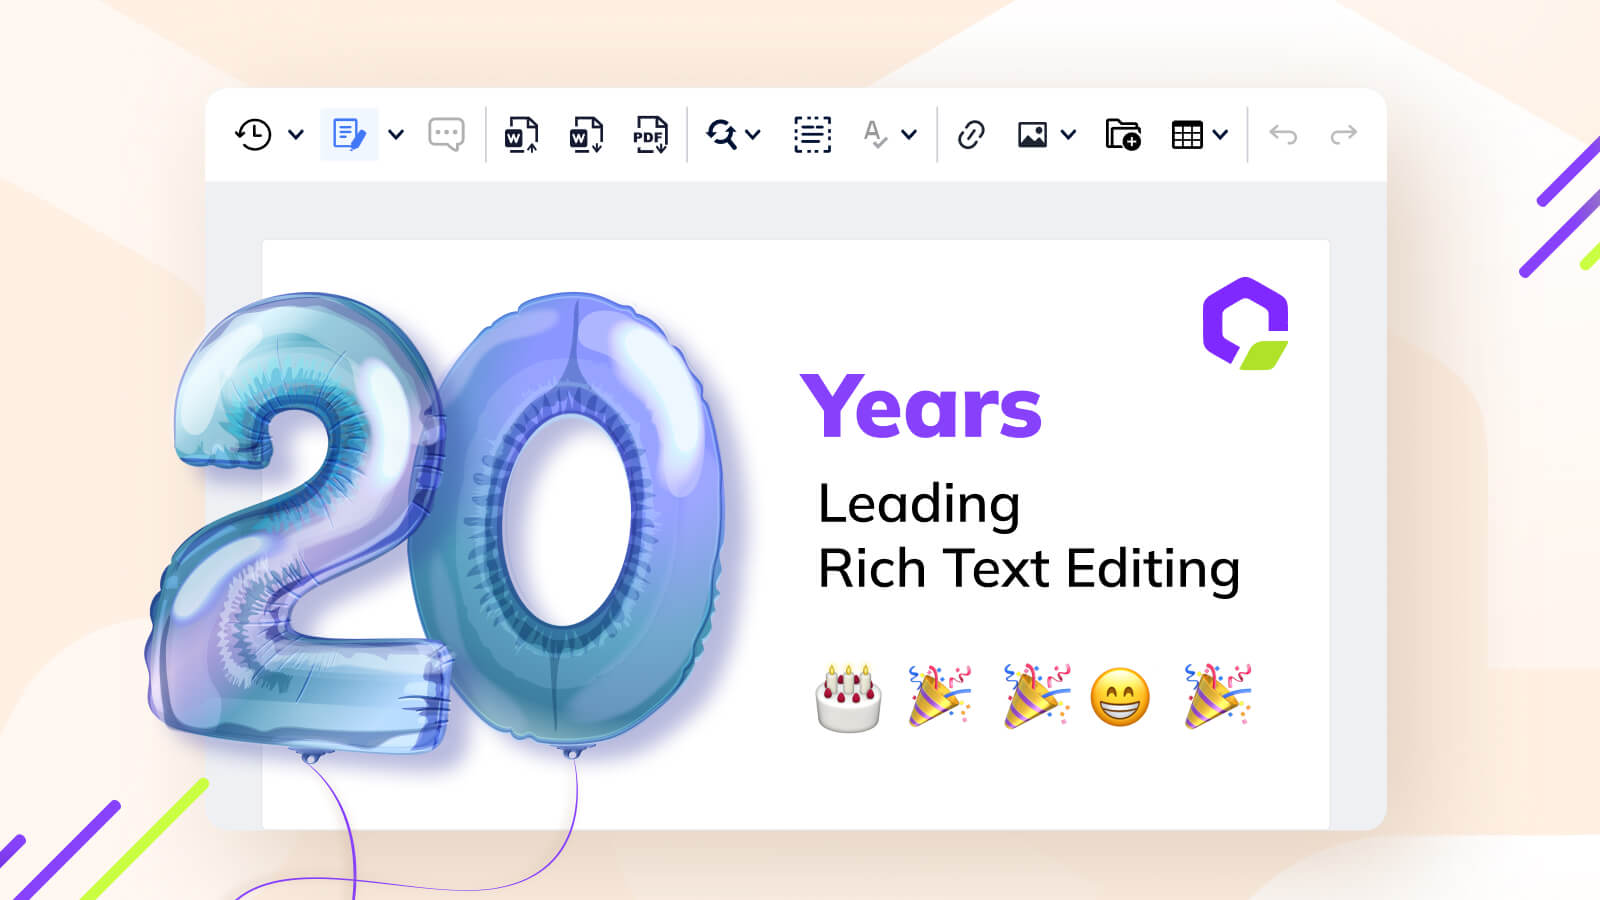 Celebrating 20 years of CKEditor